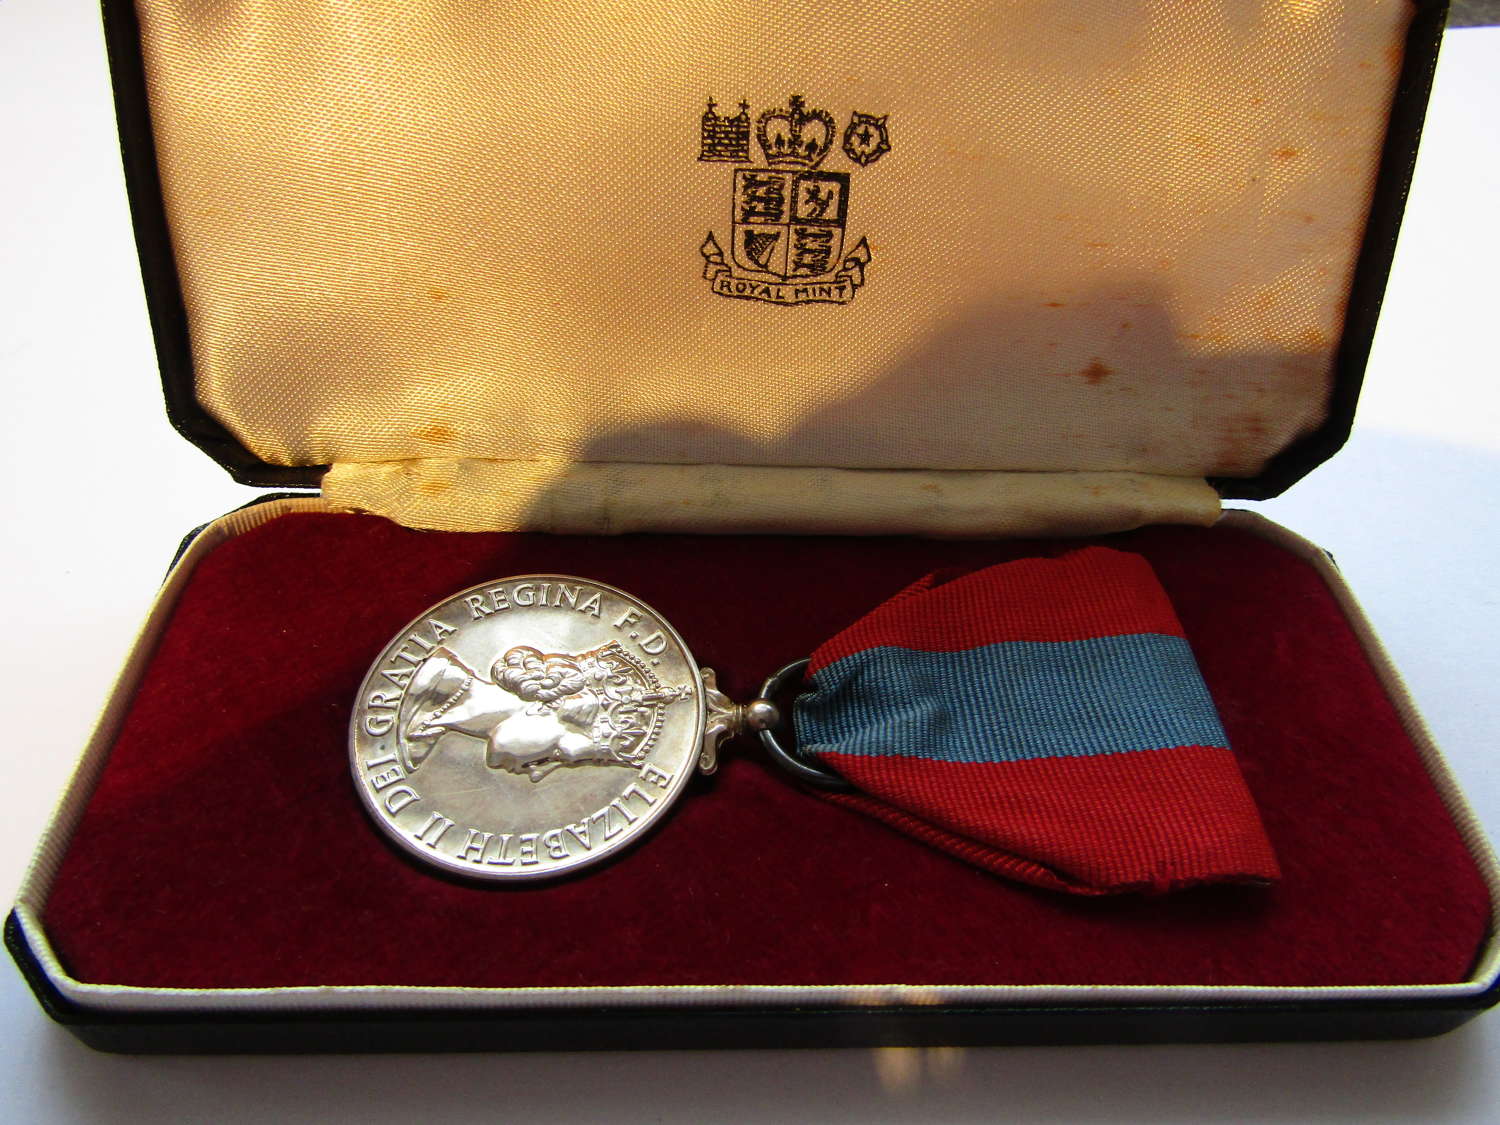 Imperial service medal